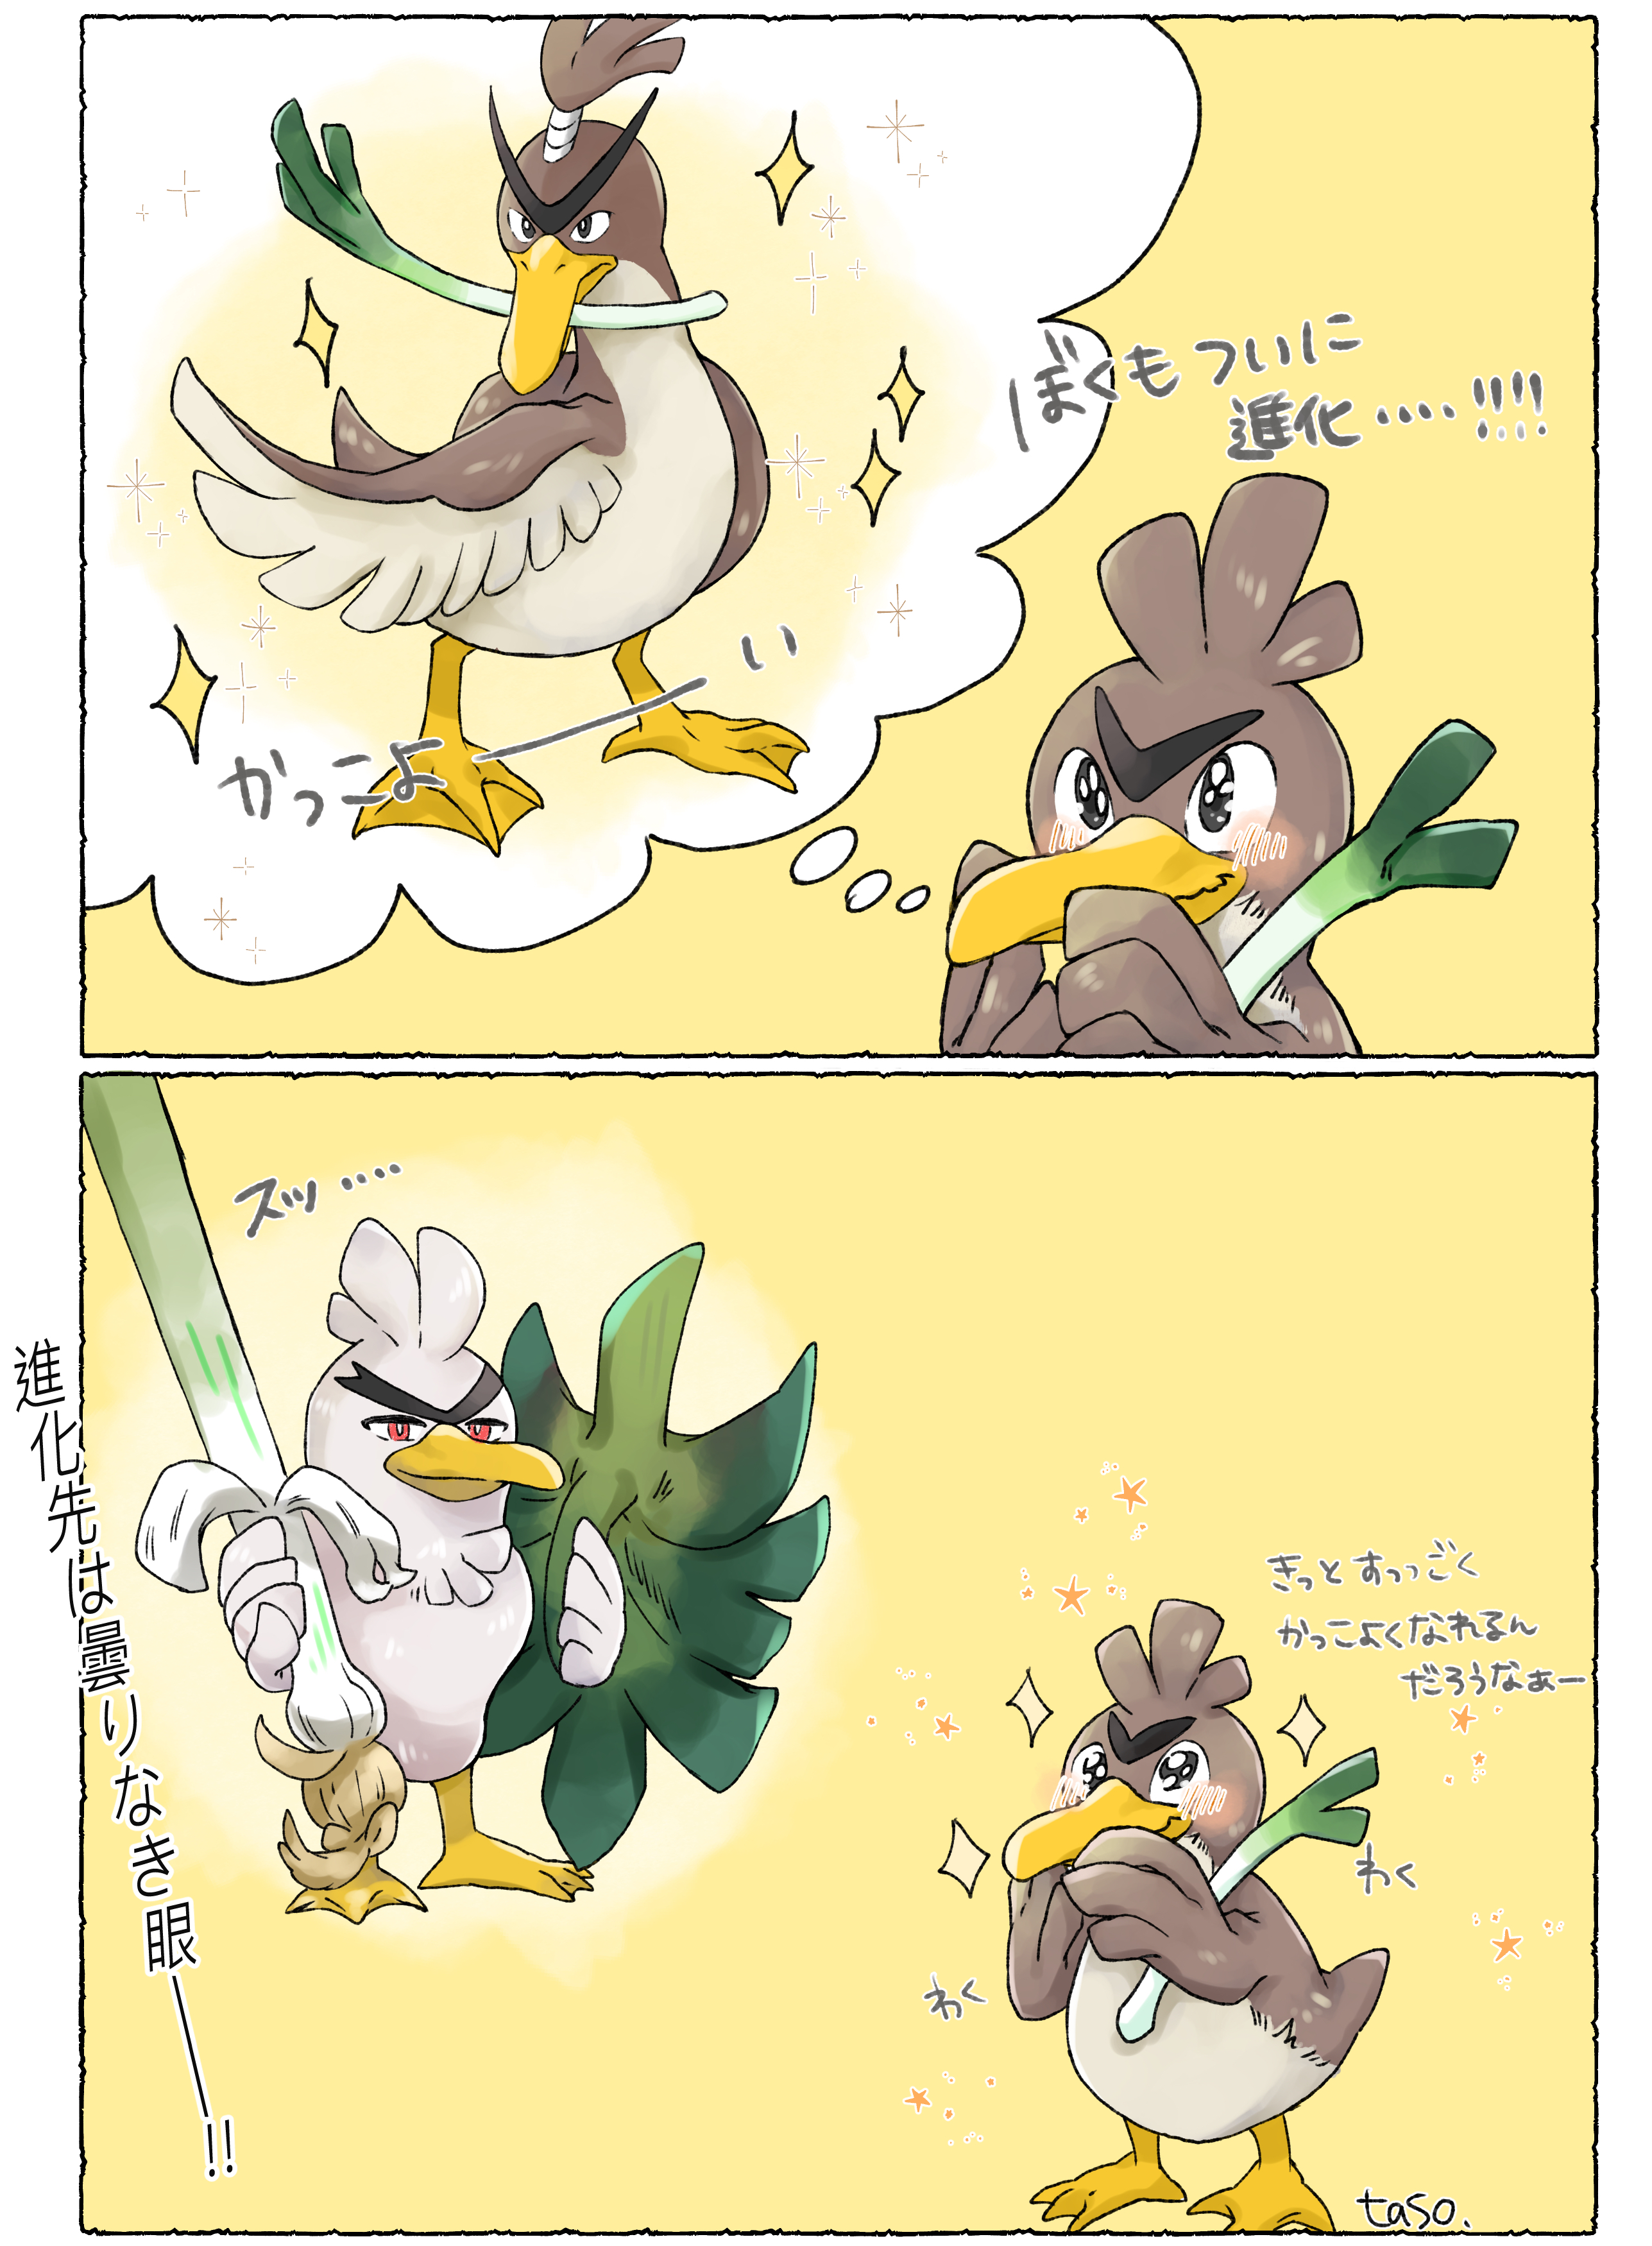 How to Evolve Farfetch'd, Sirfetch'd